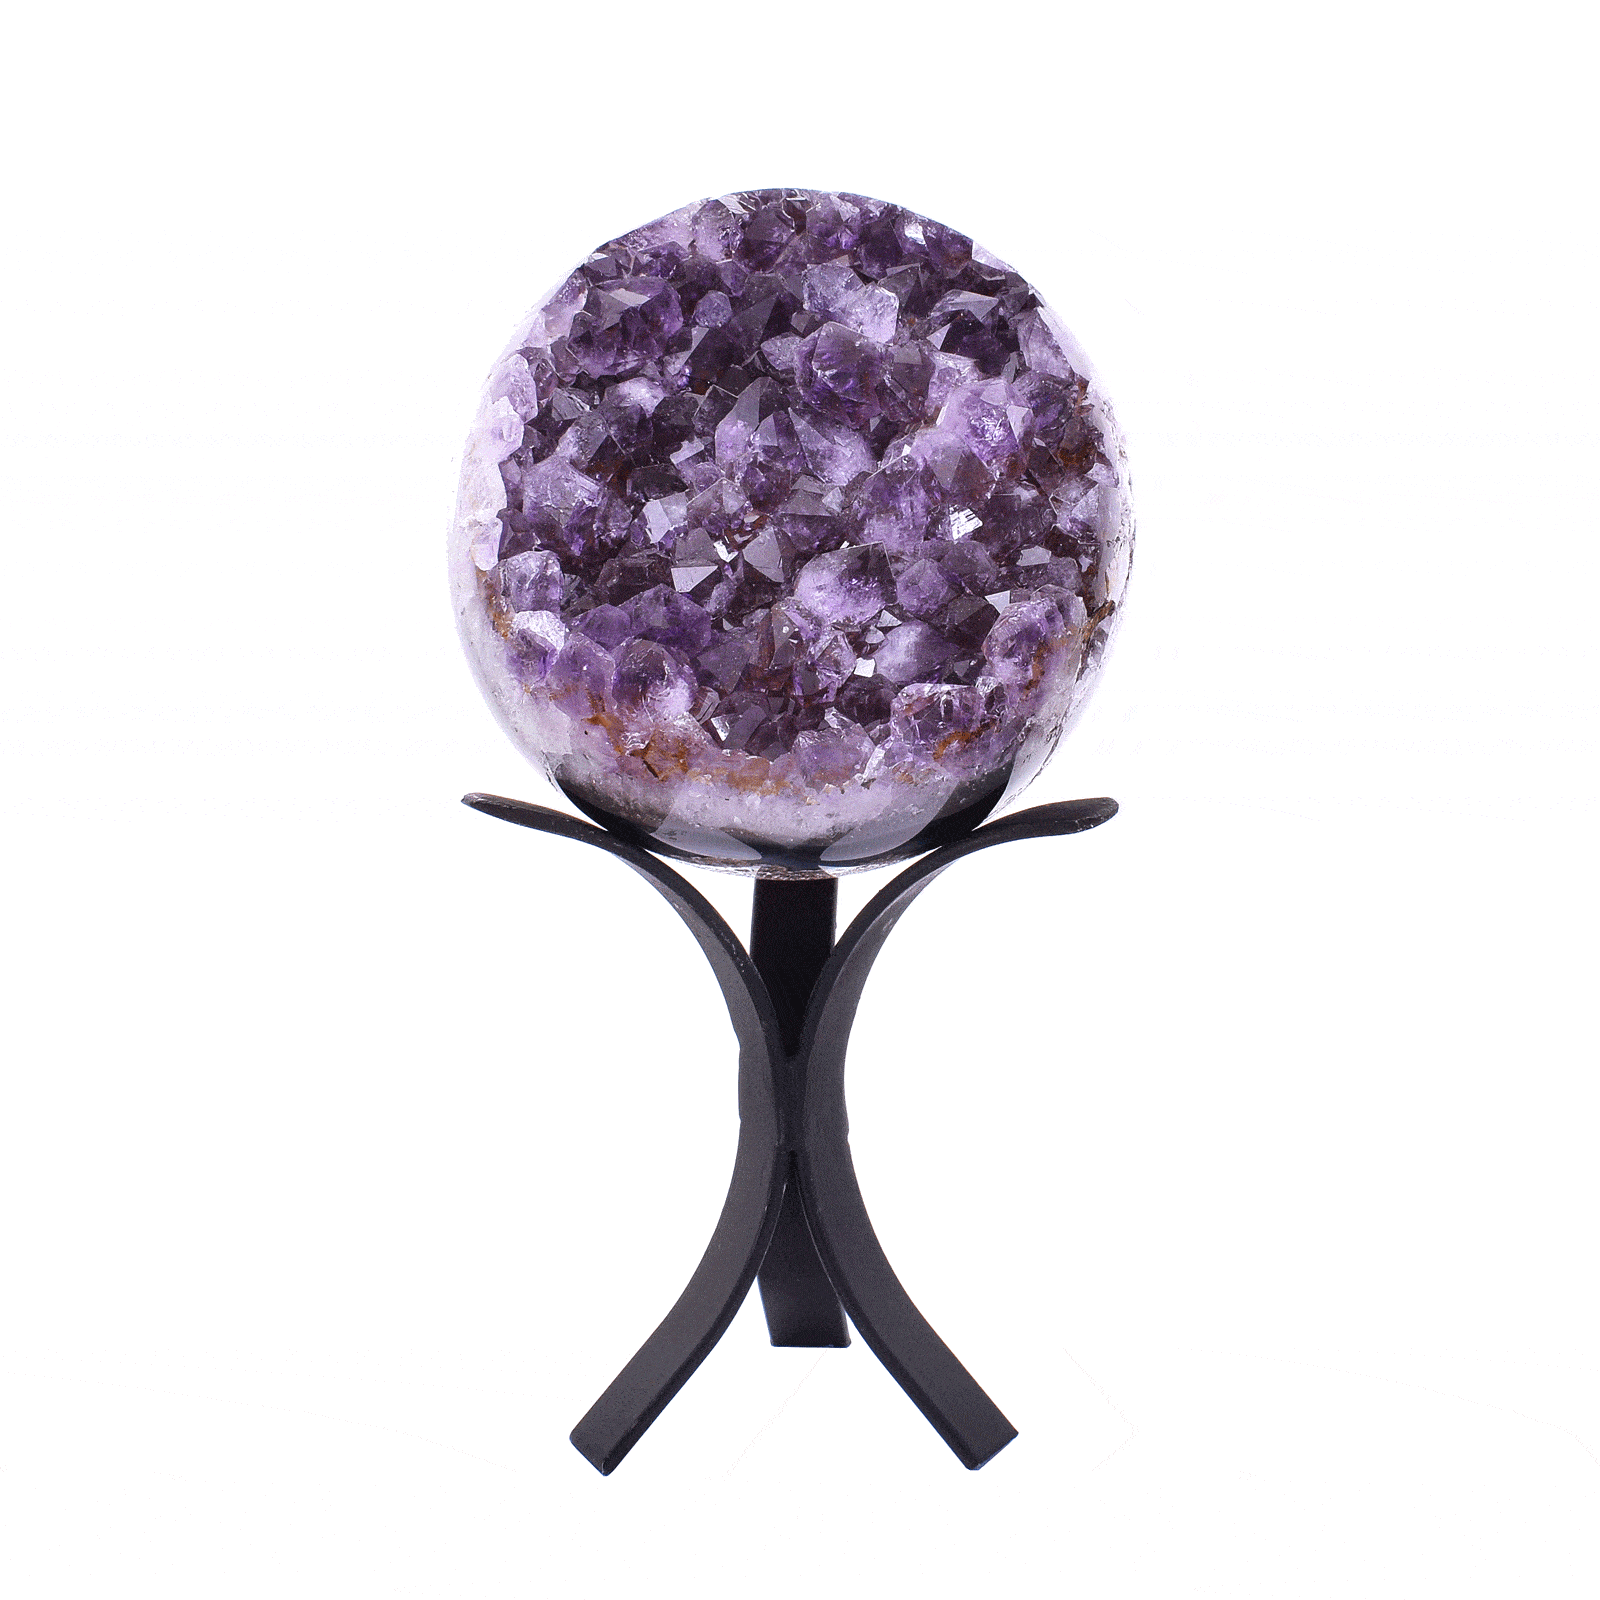 Sphere made of natural amethyst gemstone with a diameter of 10cm, placed on a metallic base. Buy online shop.